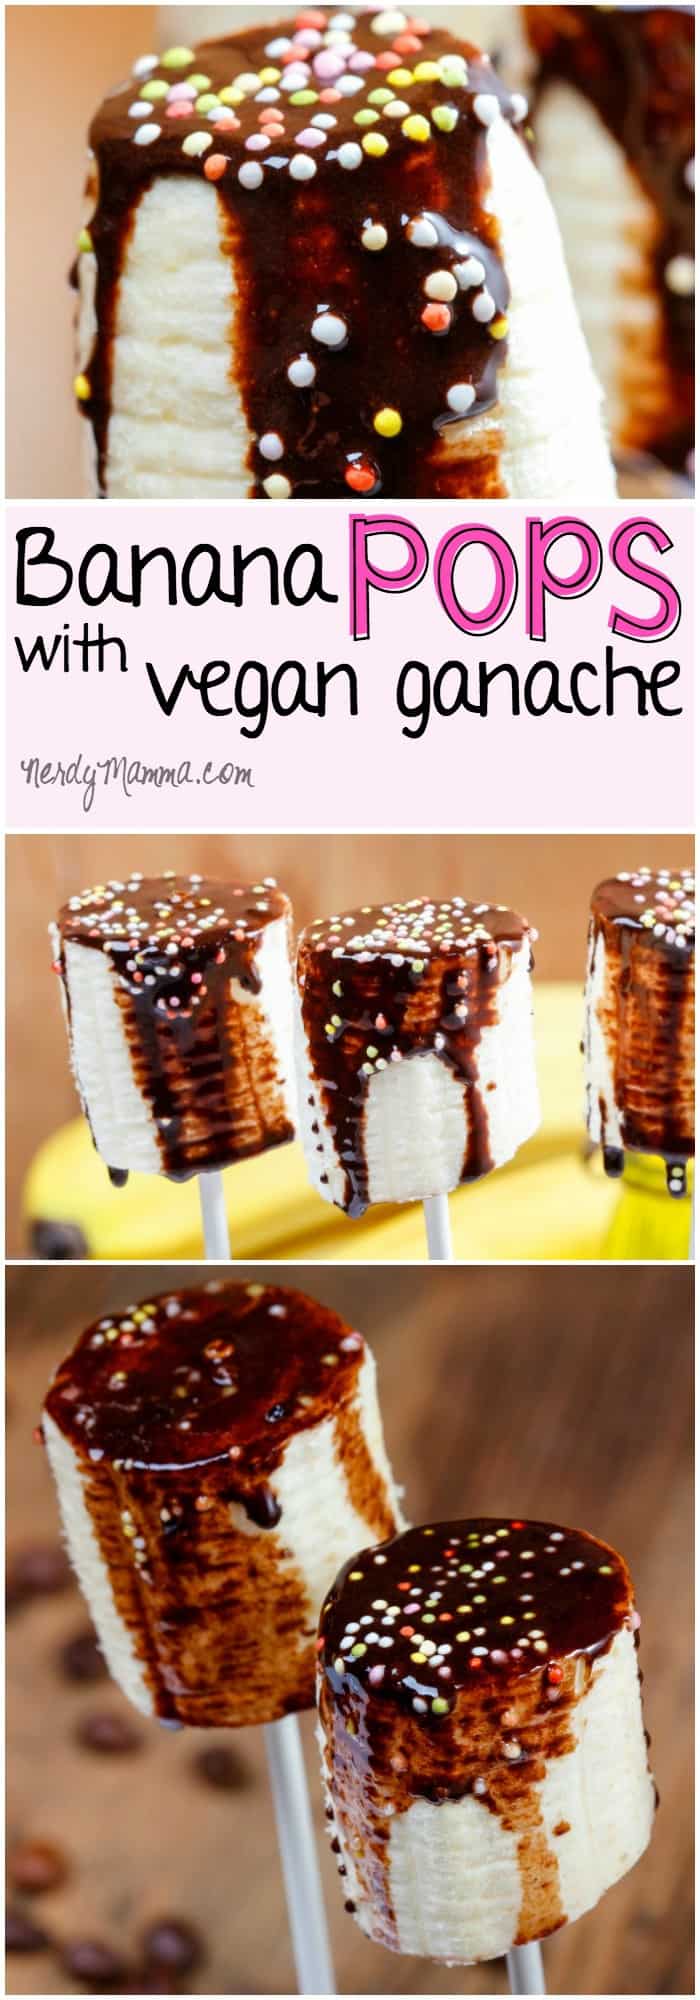 My kids flipped when they came home from school to these Banana Pops with Vegan Ganache. So yummy. And mostly healthy snack.